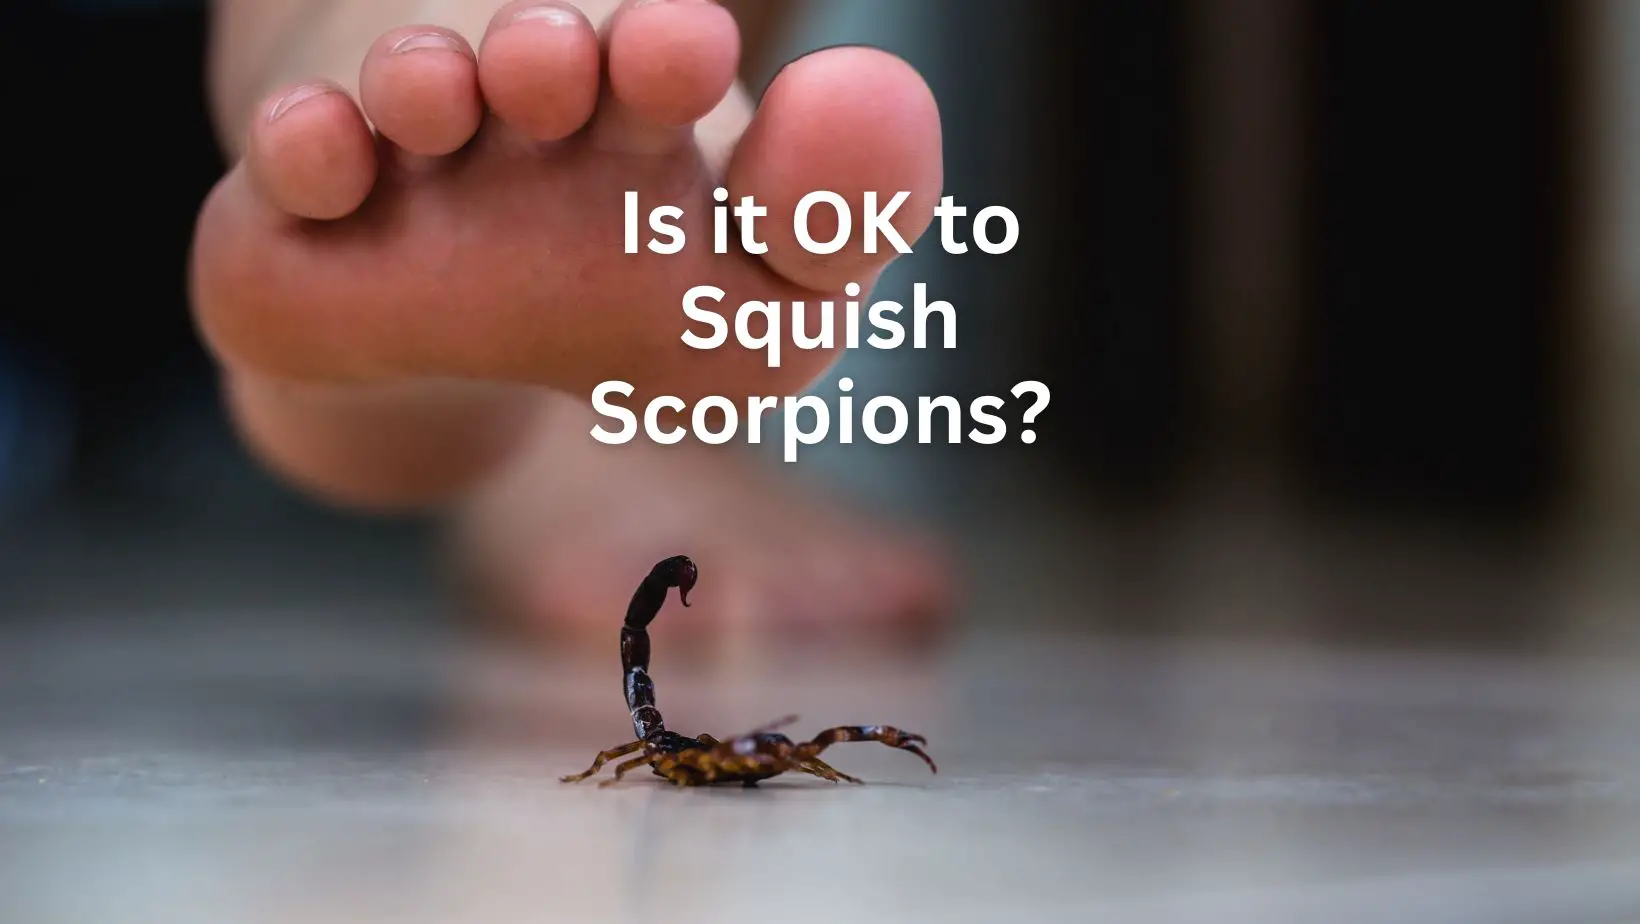 Can You Squish Scorpions